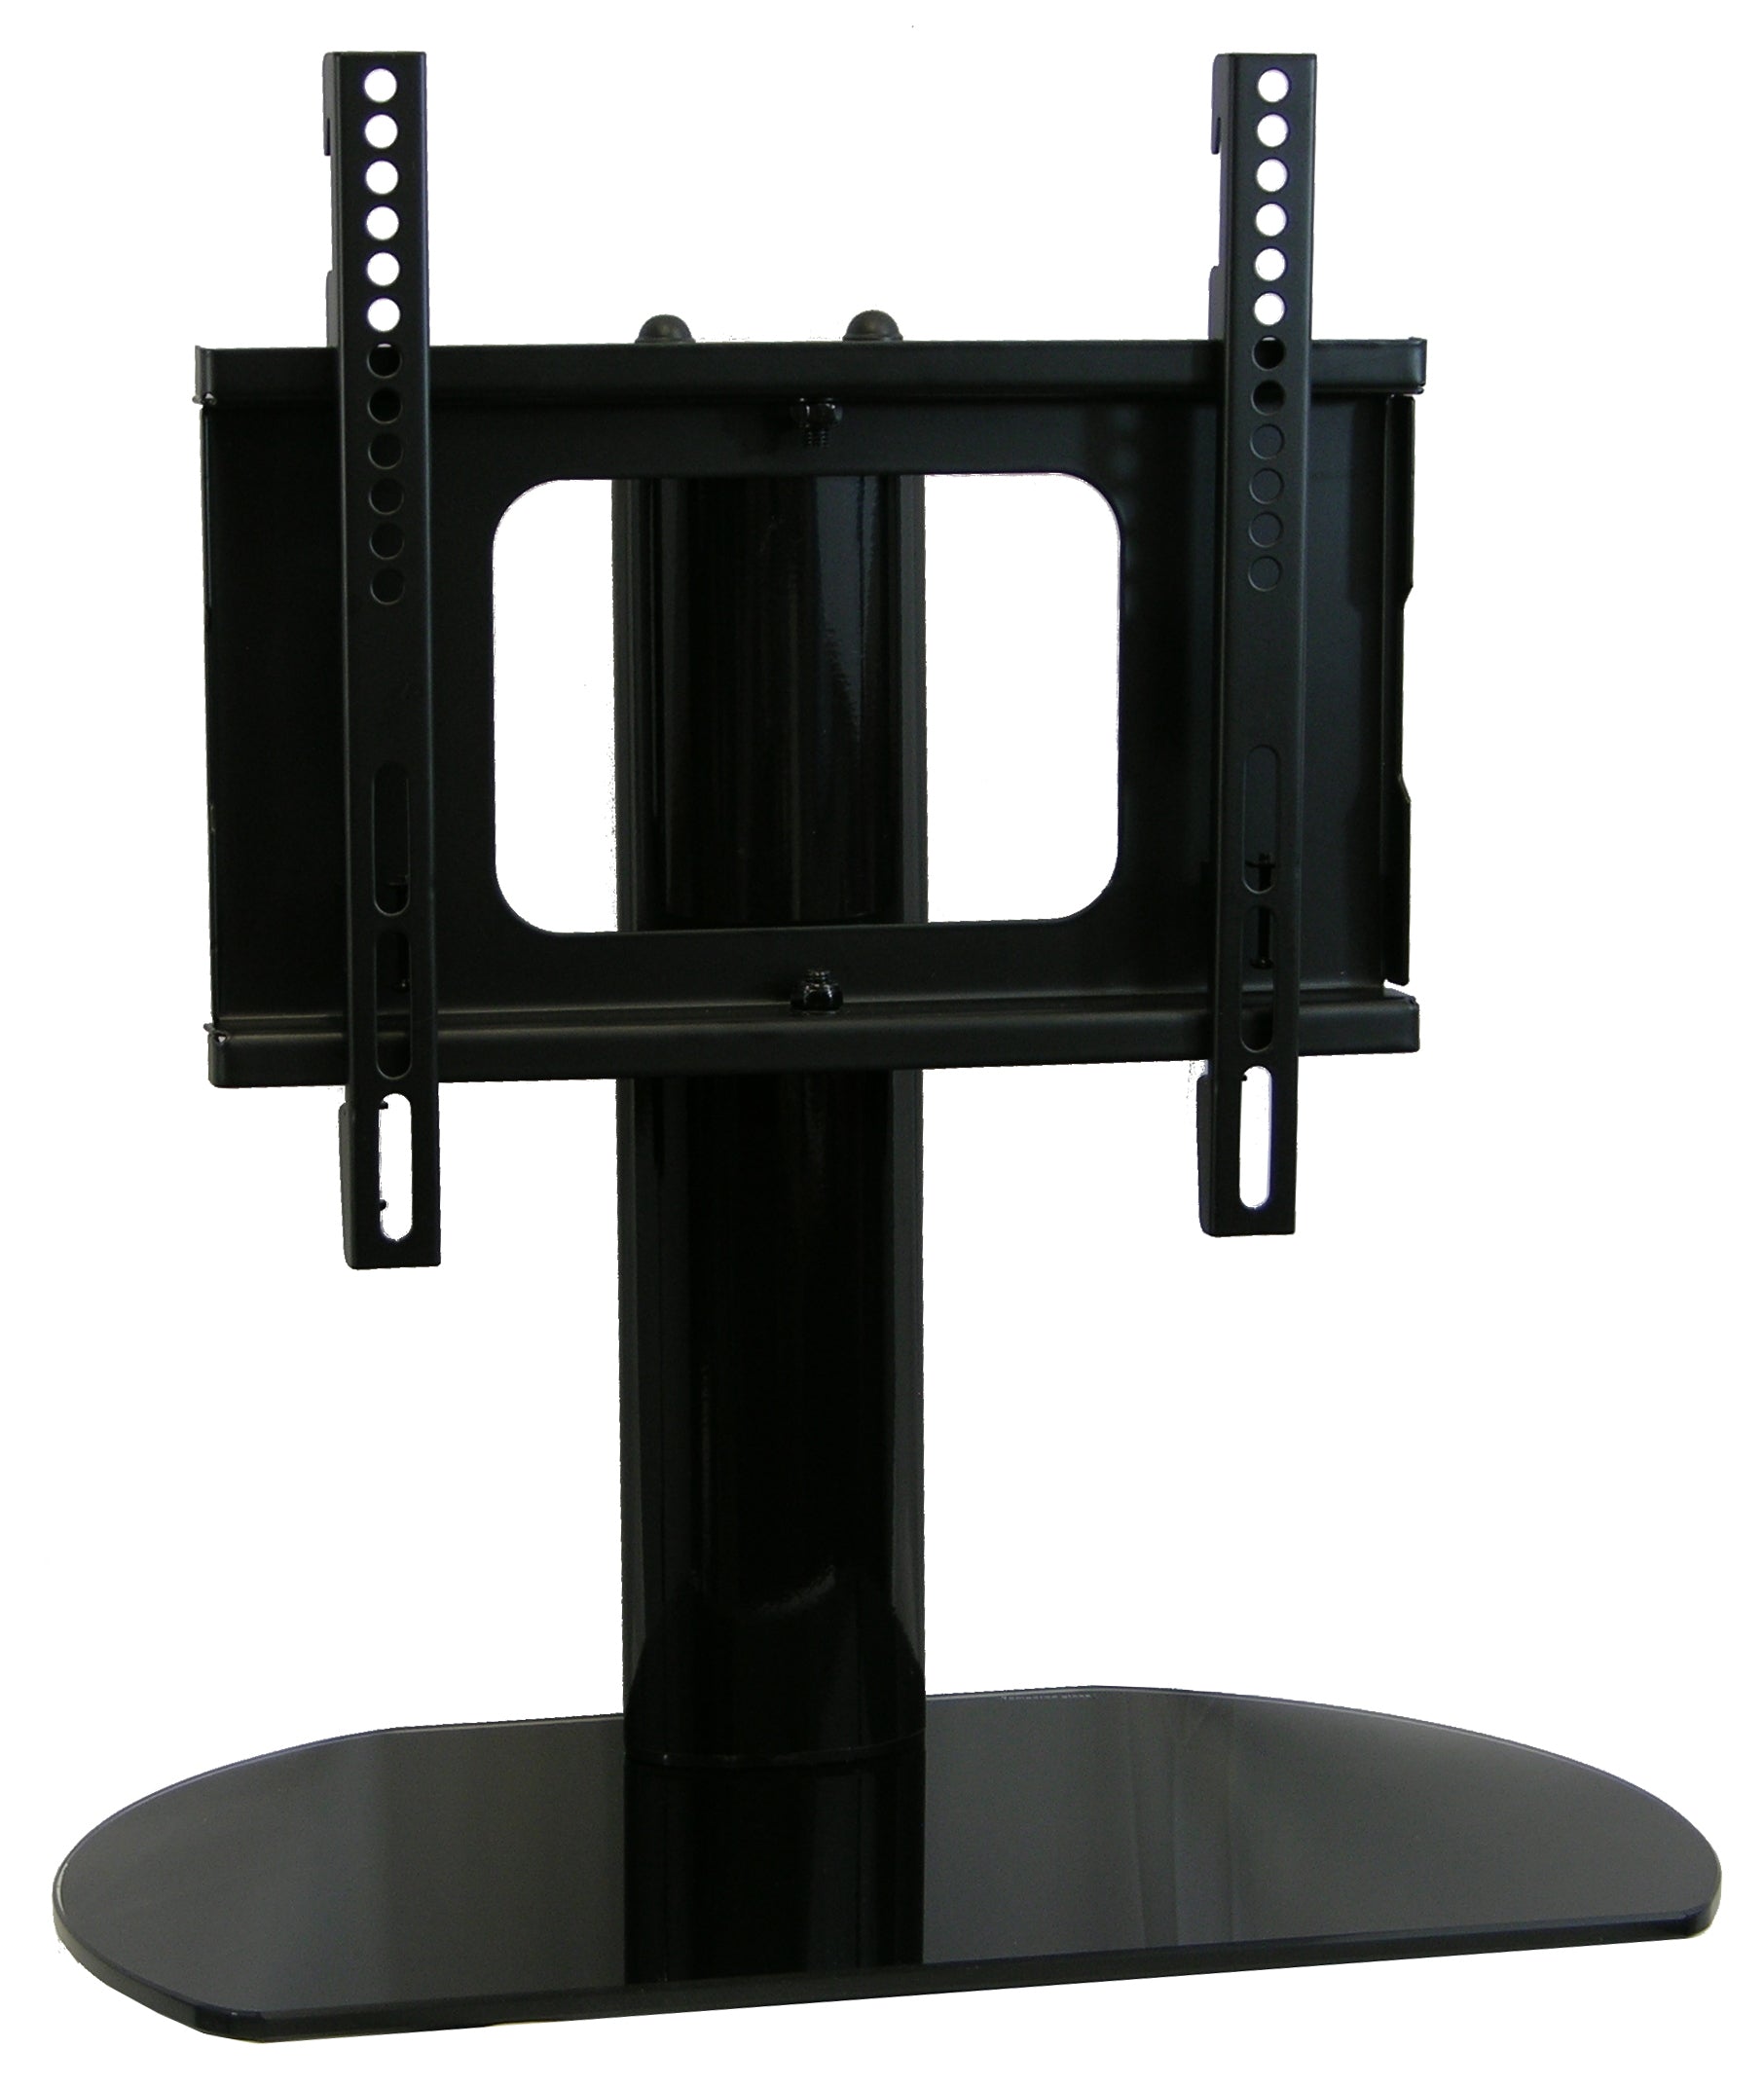 HTA Home Theater Accessories, HTA2037 HTA Home Theater Accessories Universal Replacement Swivel TV Stand/Base for 20" - 42" LED/LCD Flat Panel TV